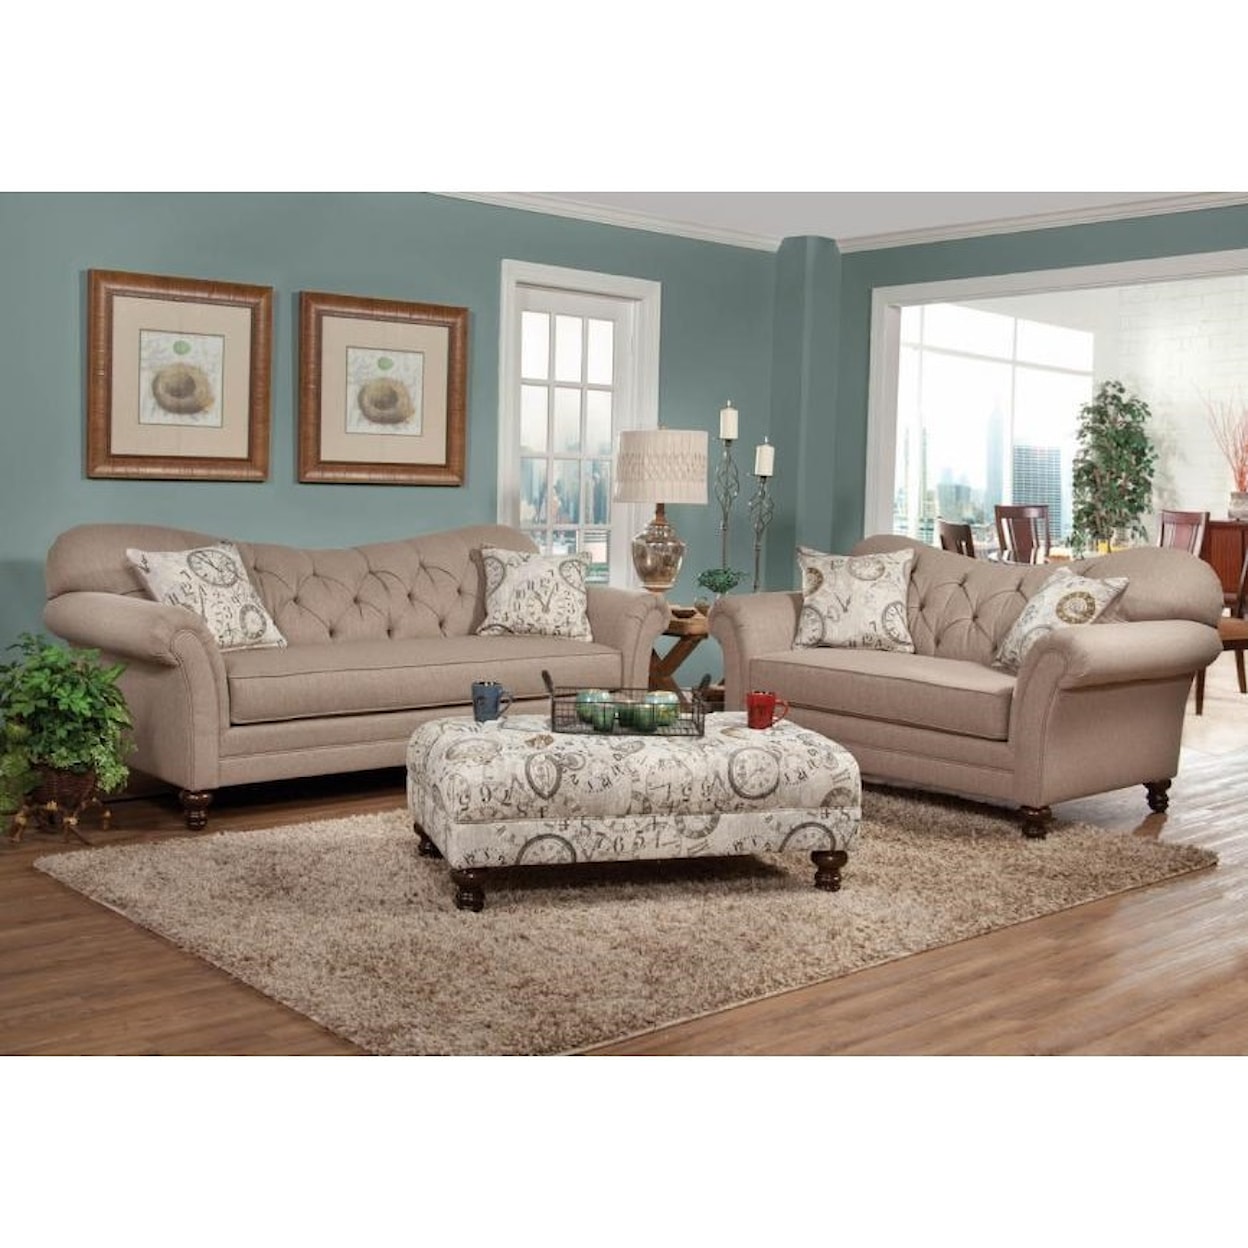 Serta Upholstery by Hughes Furniture 8750 Stationary Living Room Group